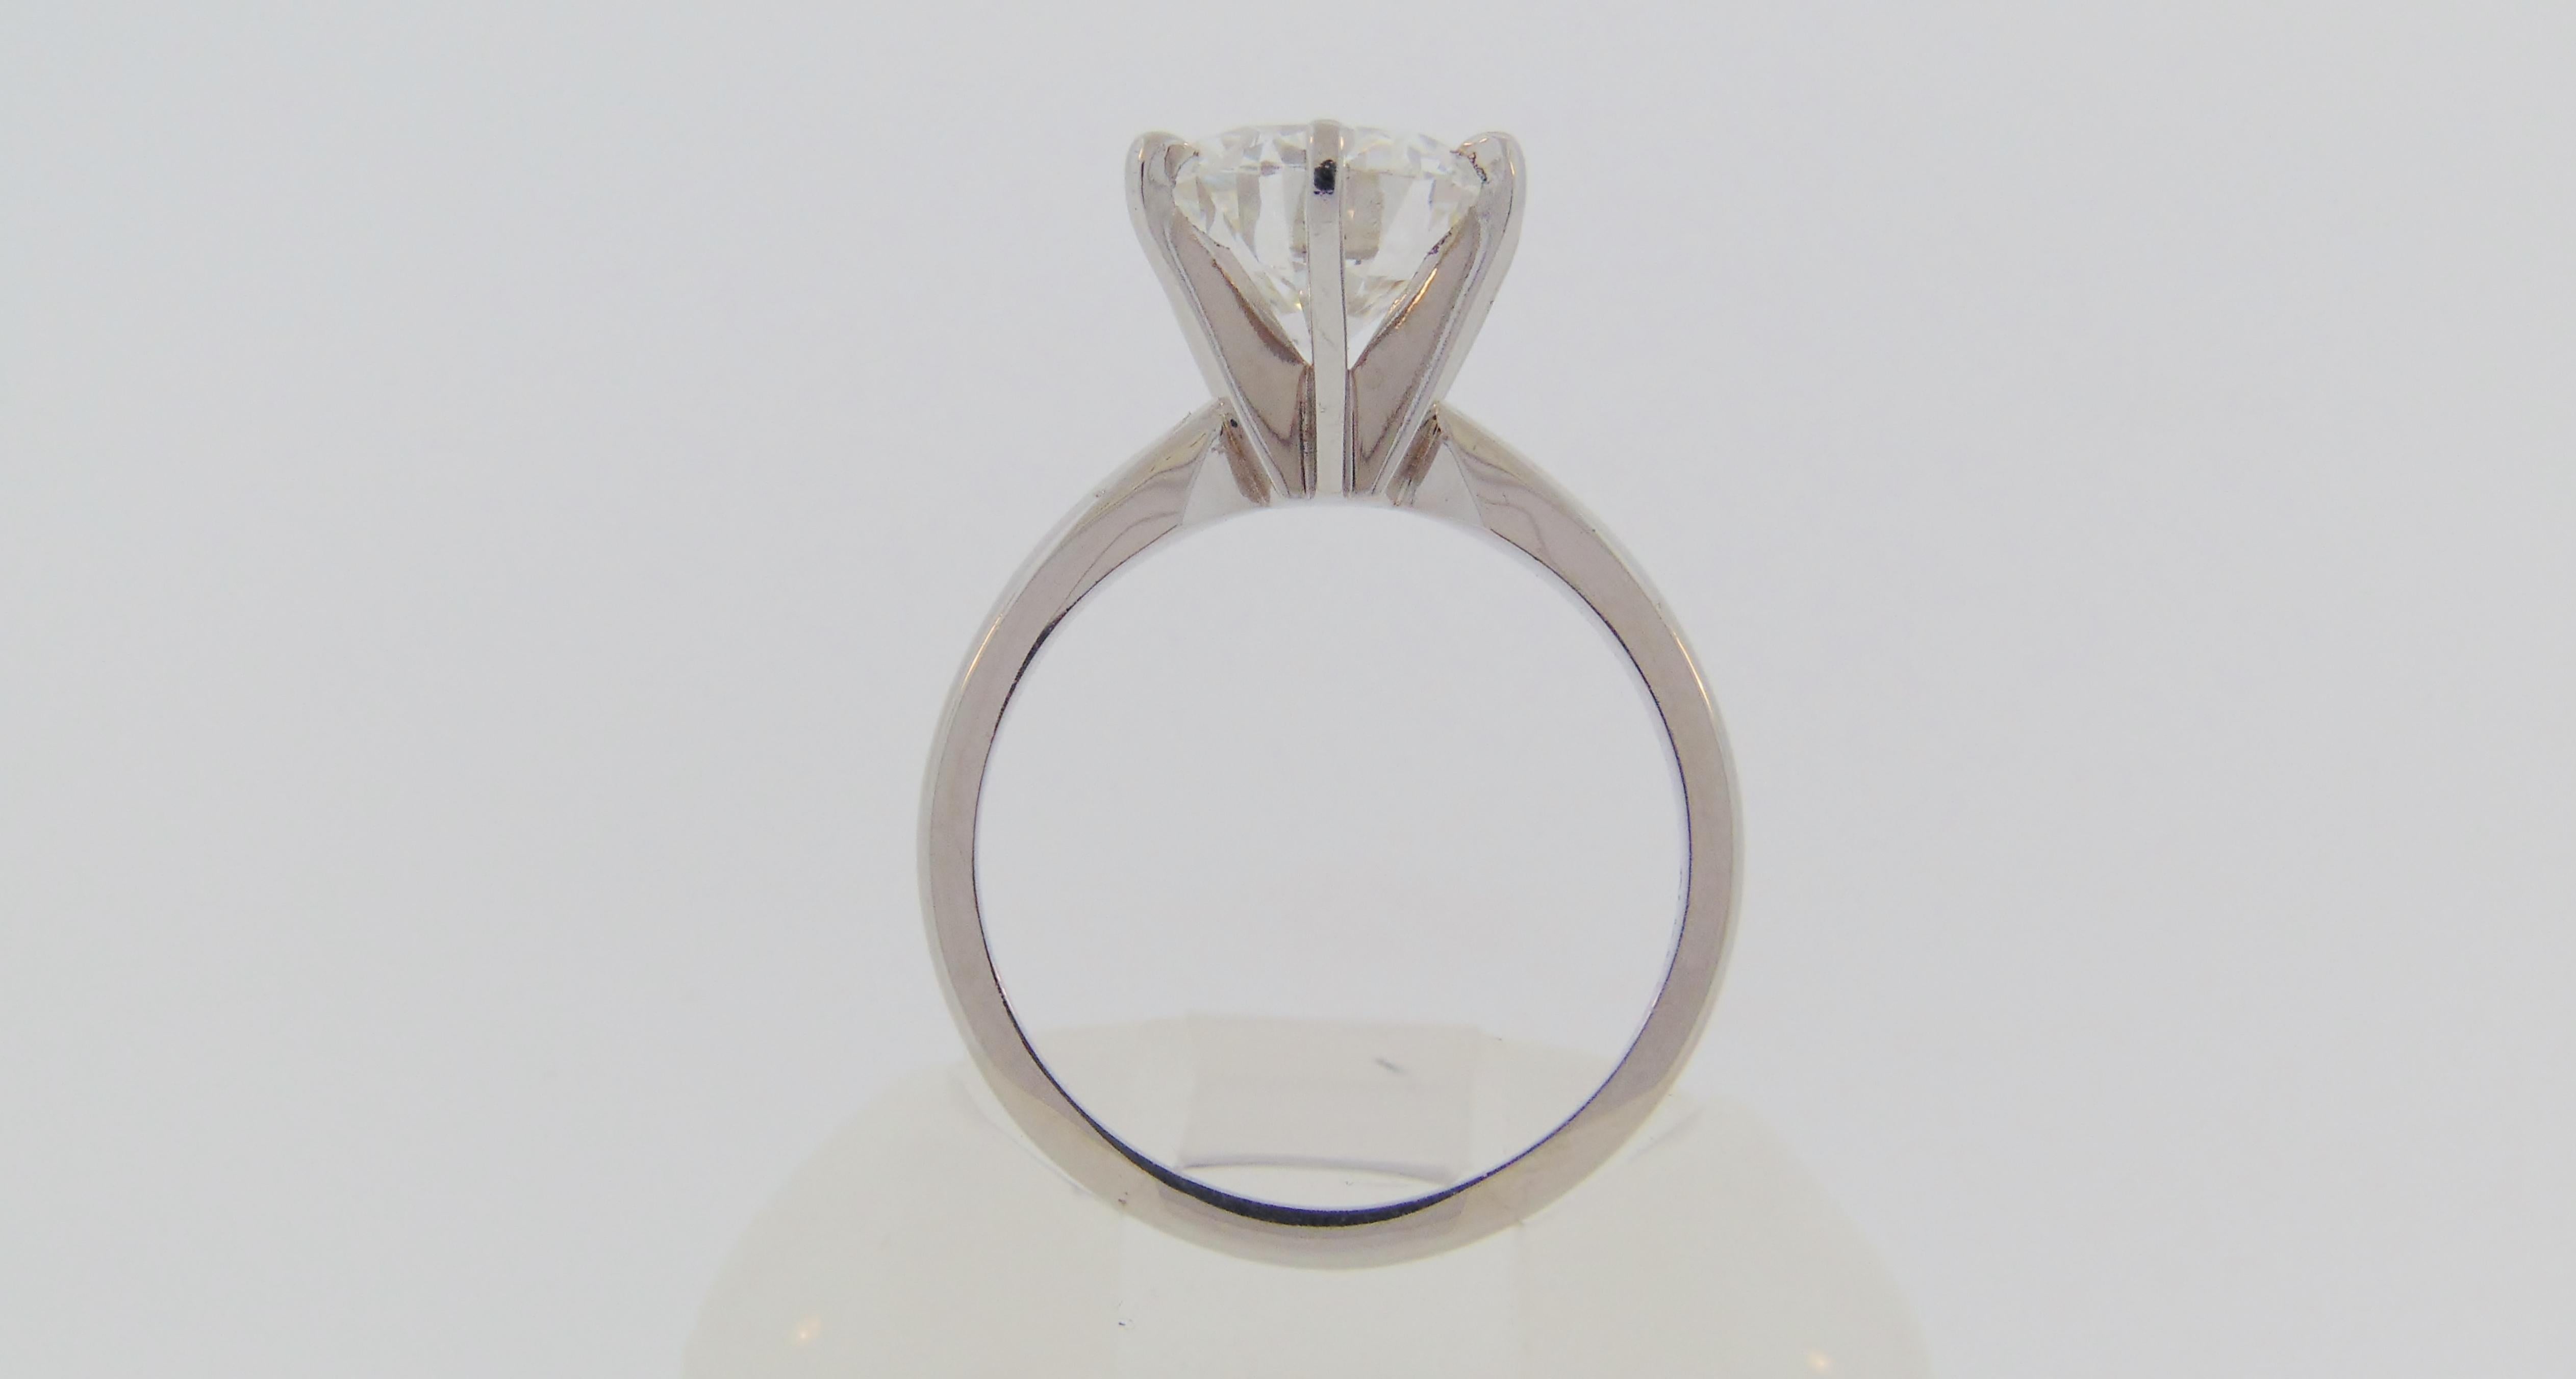 GIA Certified VVS2 G Round 2.82ct Diamond Set in a Platinum 6 prong Solitaire 
Measurements: 9.18mm - 9.28mm x 5.46
Fluorescence: none